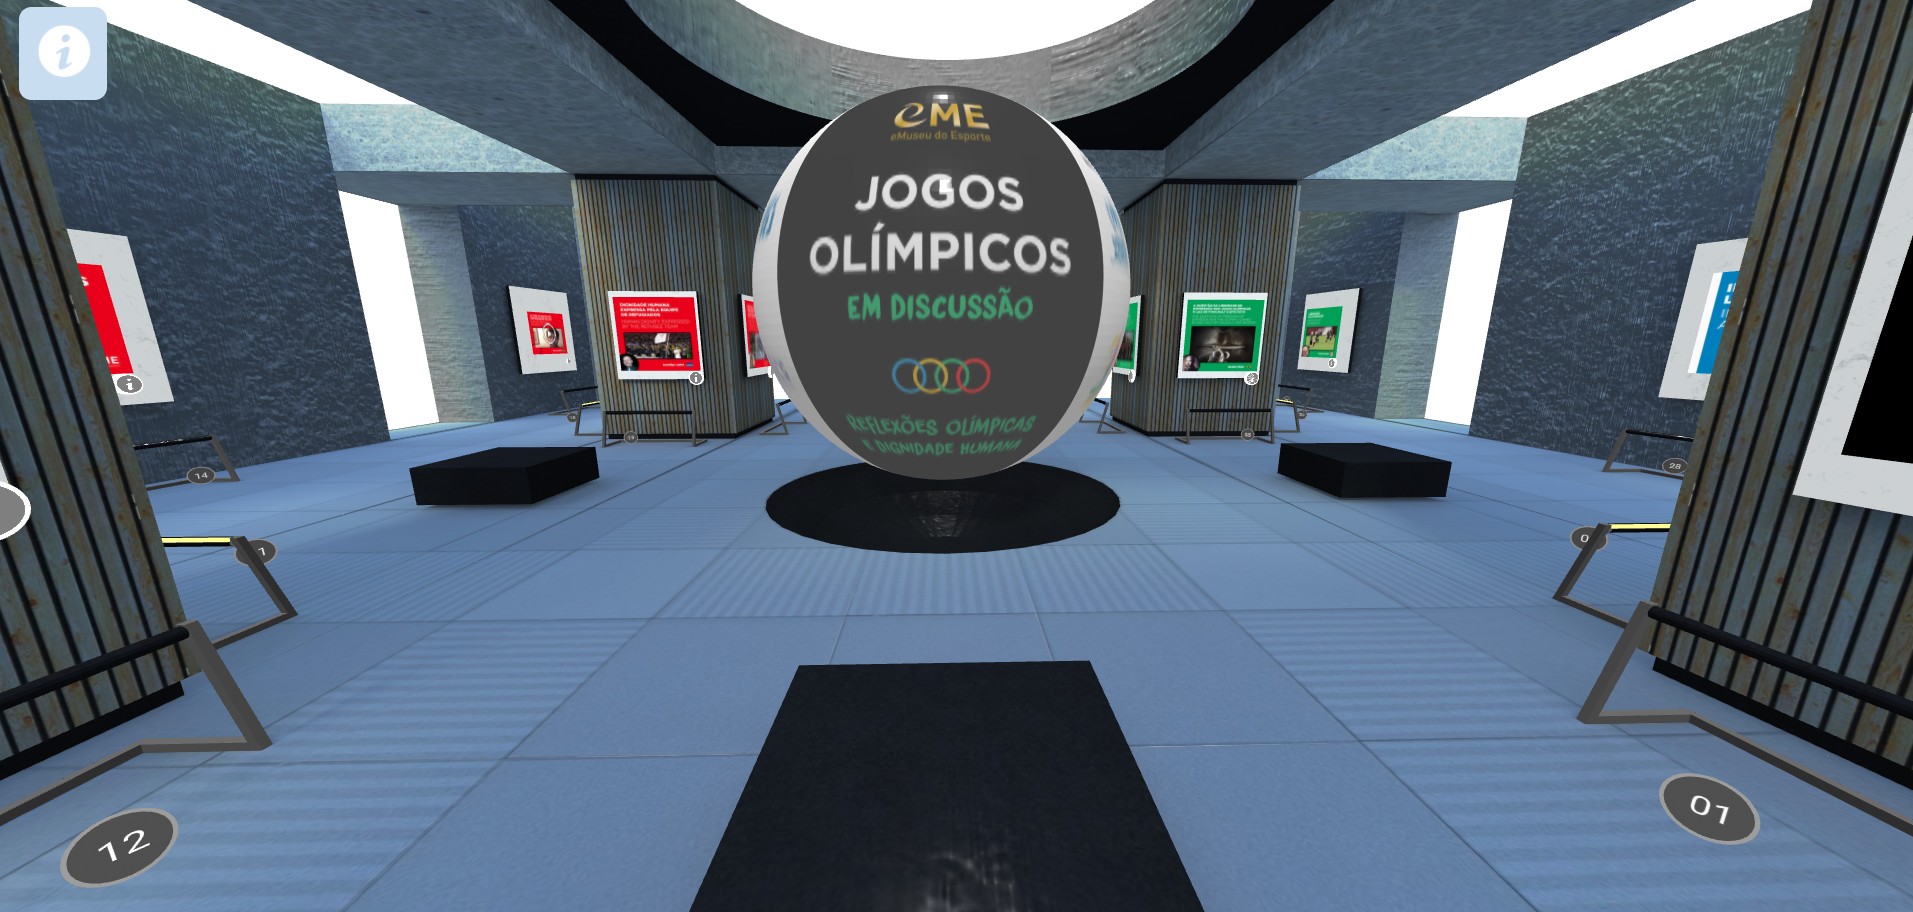 The virtual exhibition stimulates discussion of social agendas at the Olympics (Image: Reproduction/eMuseu do Esporte)